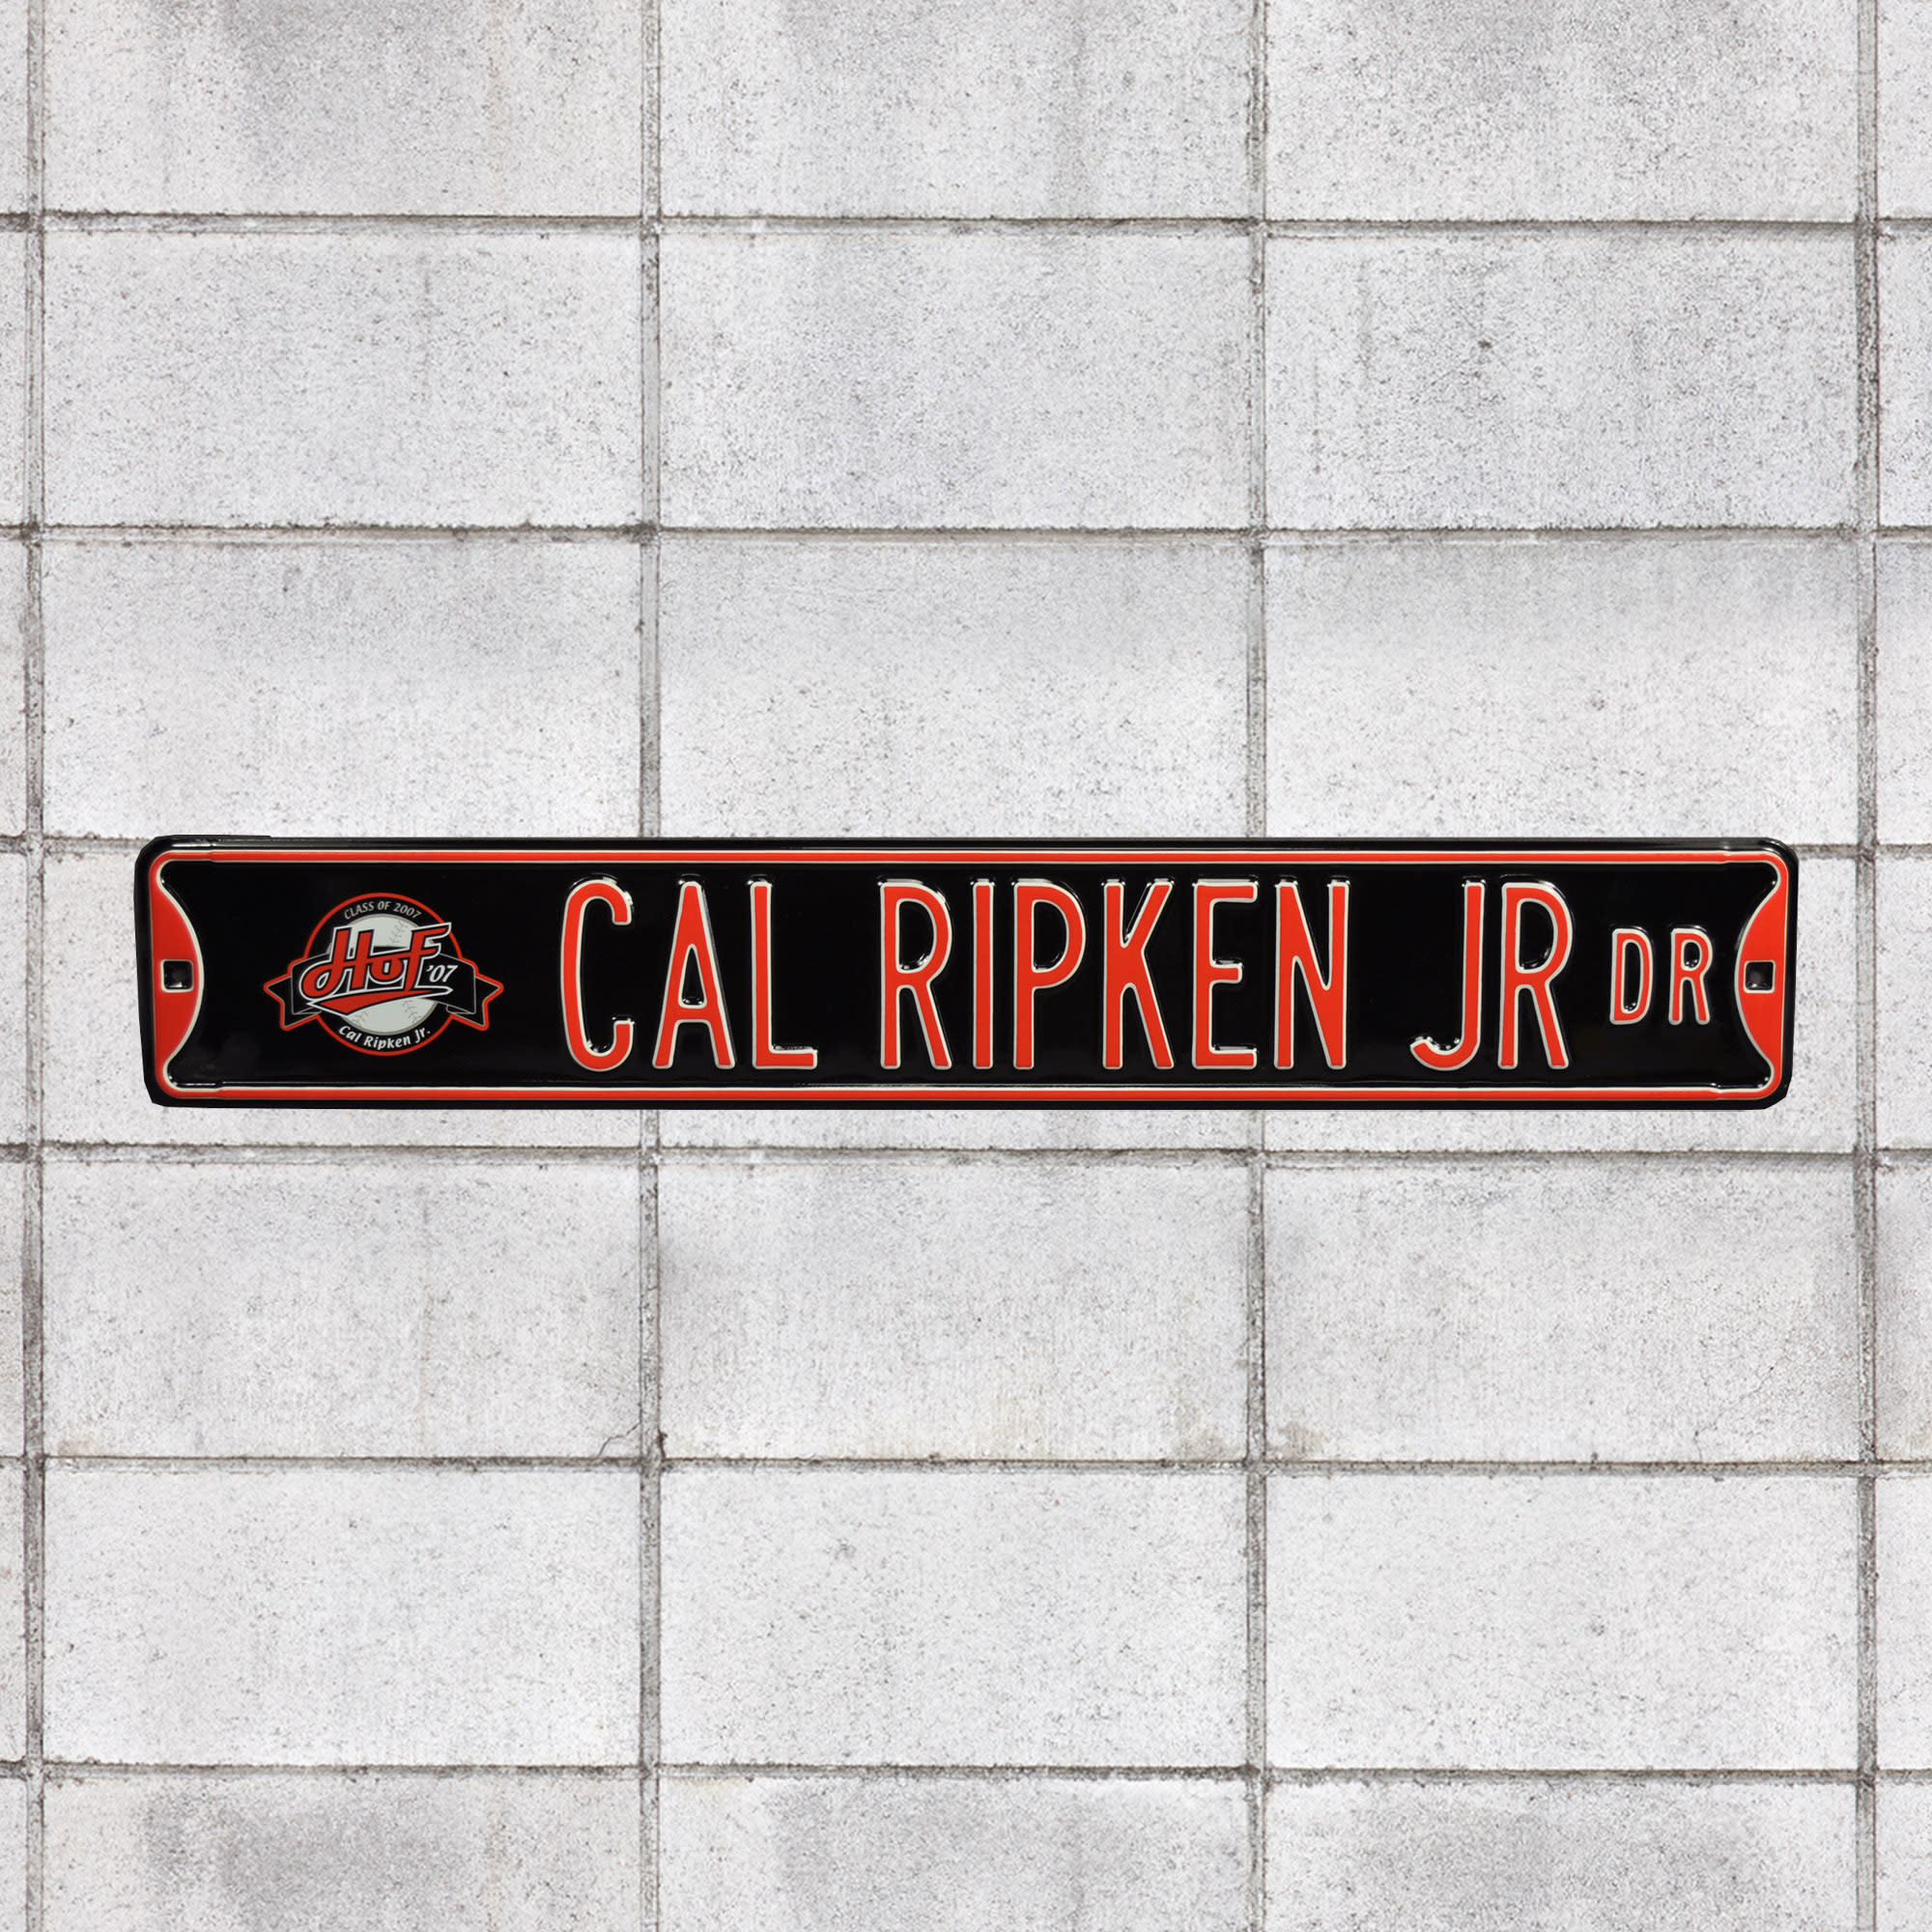 Carolina Hurricanes: Man Cave - Officially Licensed NHL Metal Street Sign 36.0"W x 6.0"H by Fathead | 100% Steel